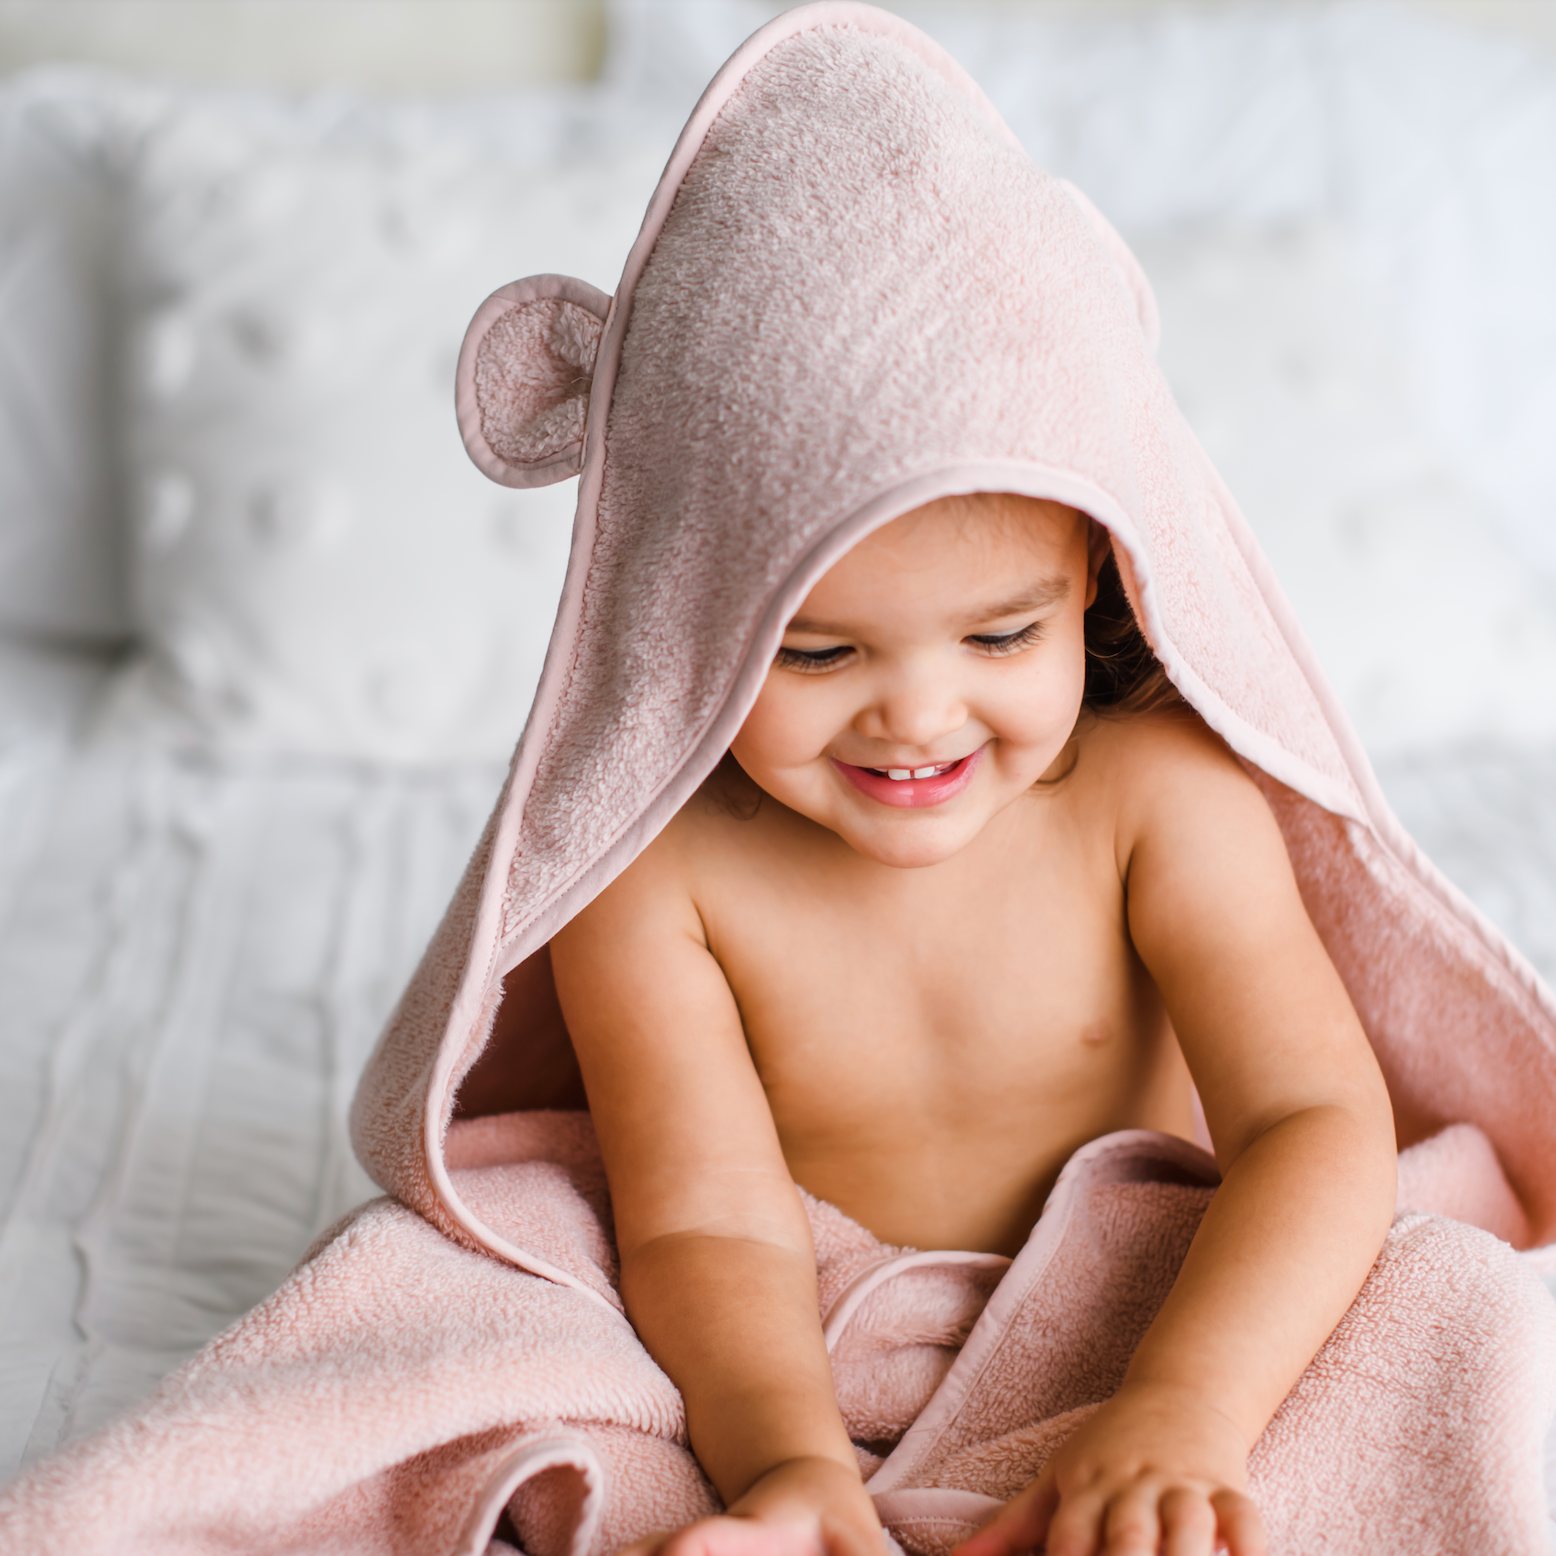 What Should You Know if You're Buying a Baby Towel